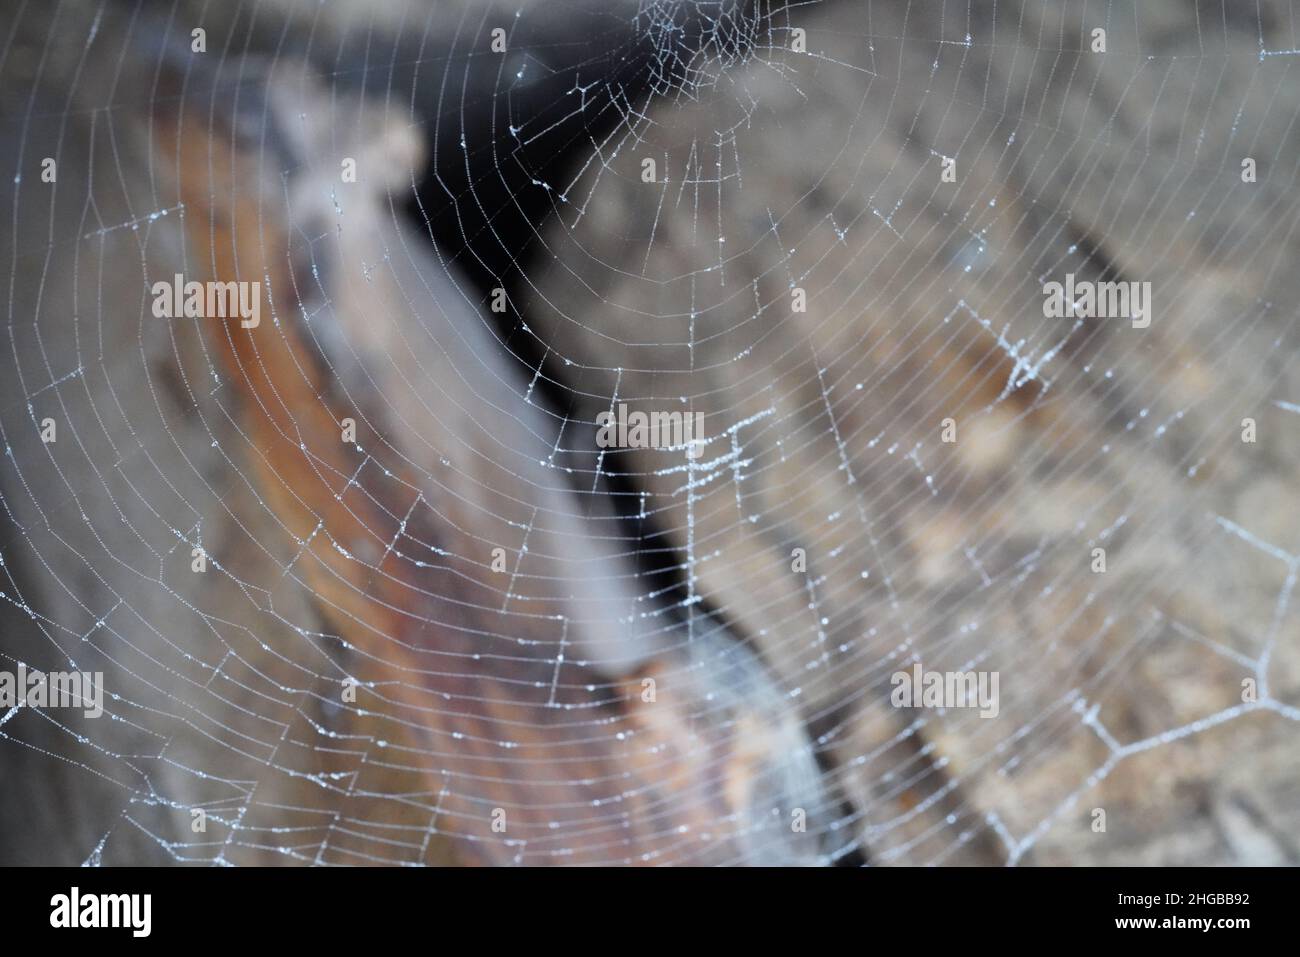 Spiders Web with logs in background Stock Photo